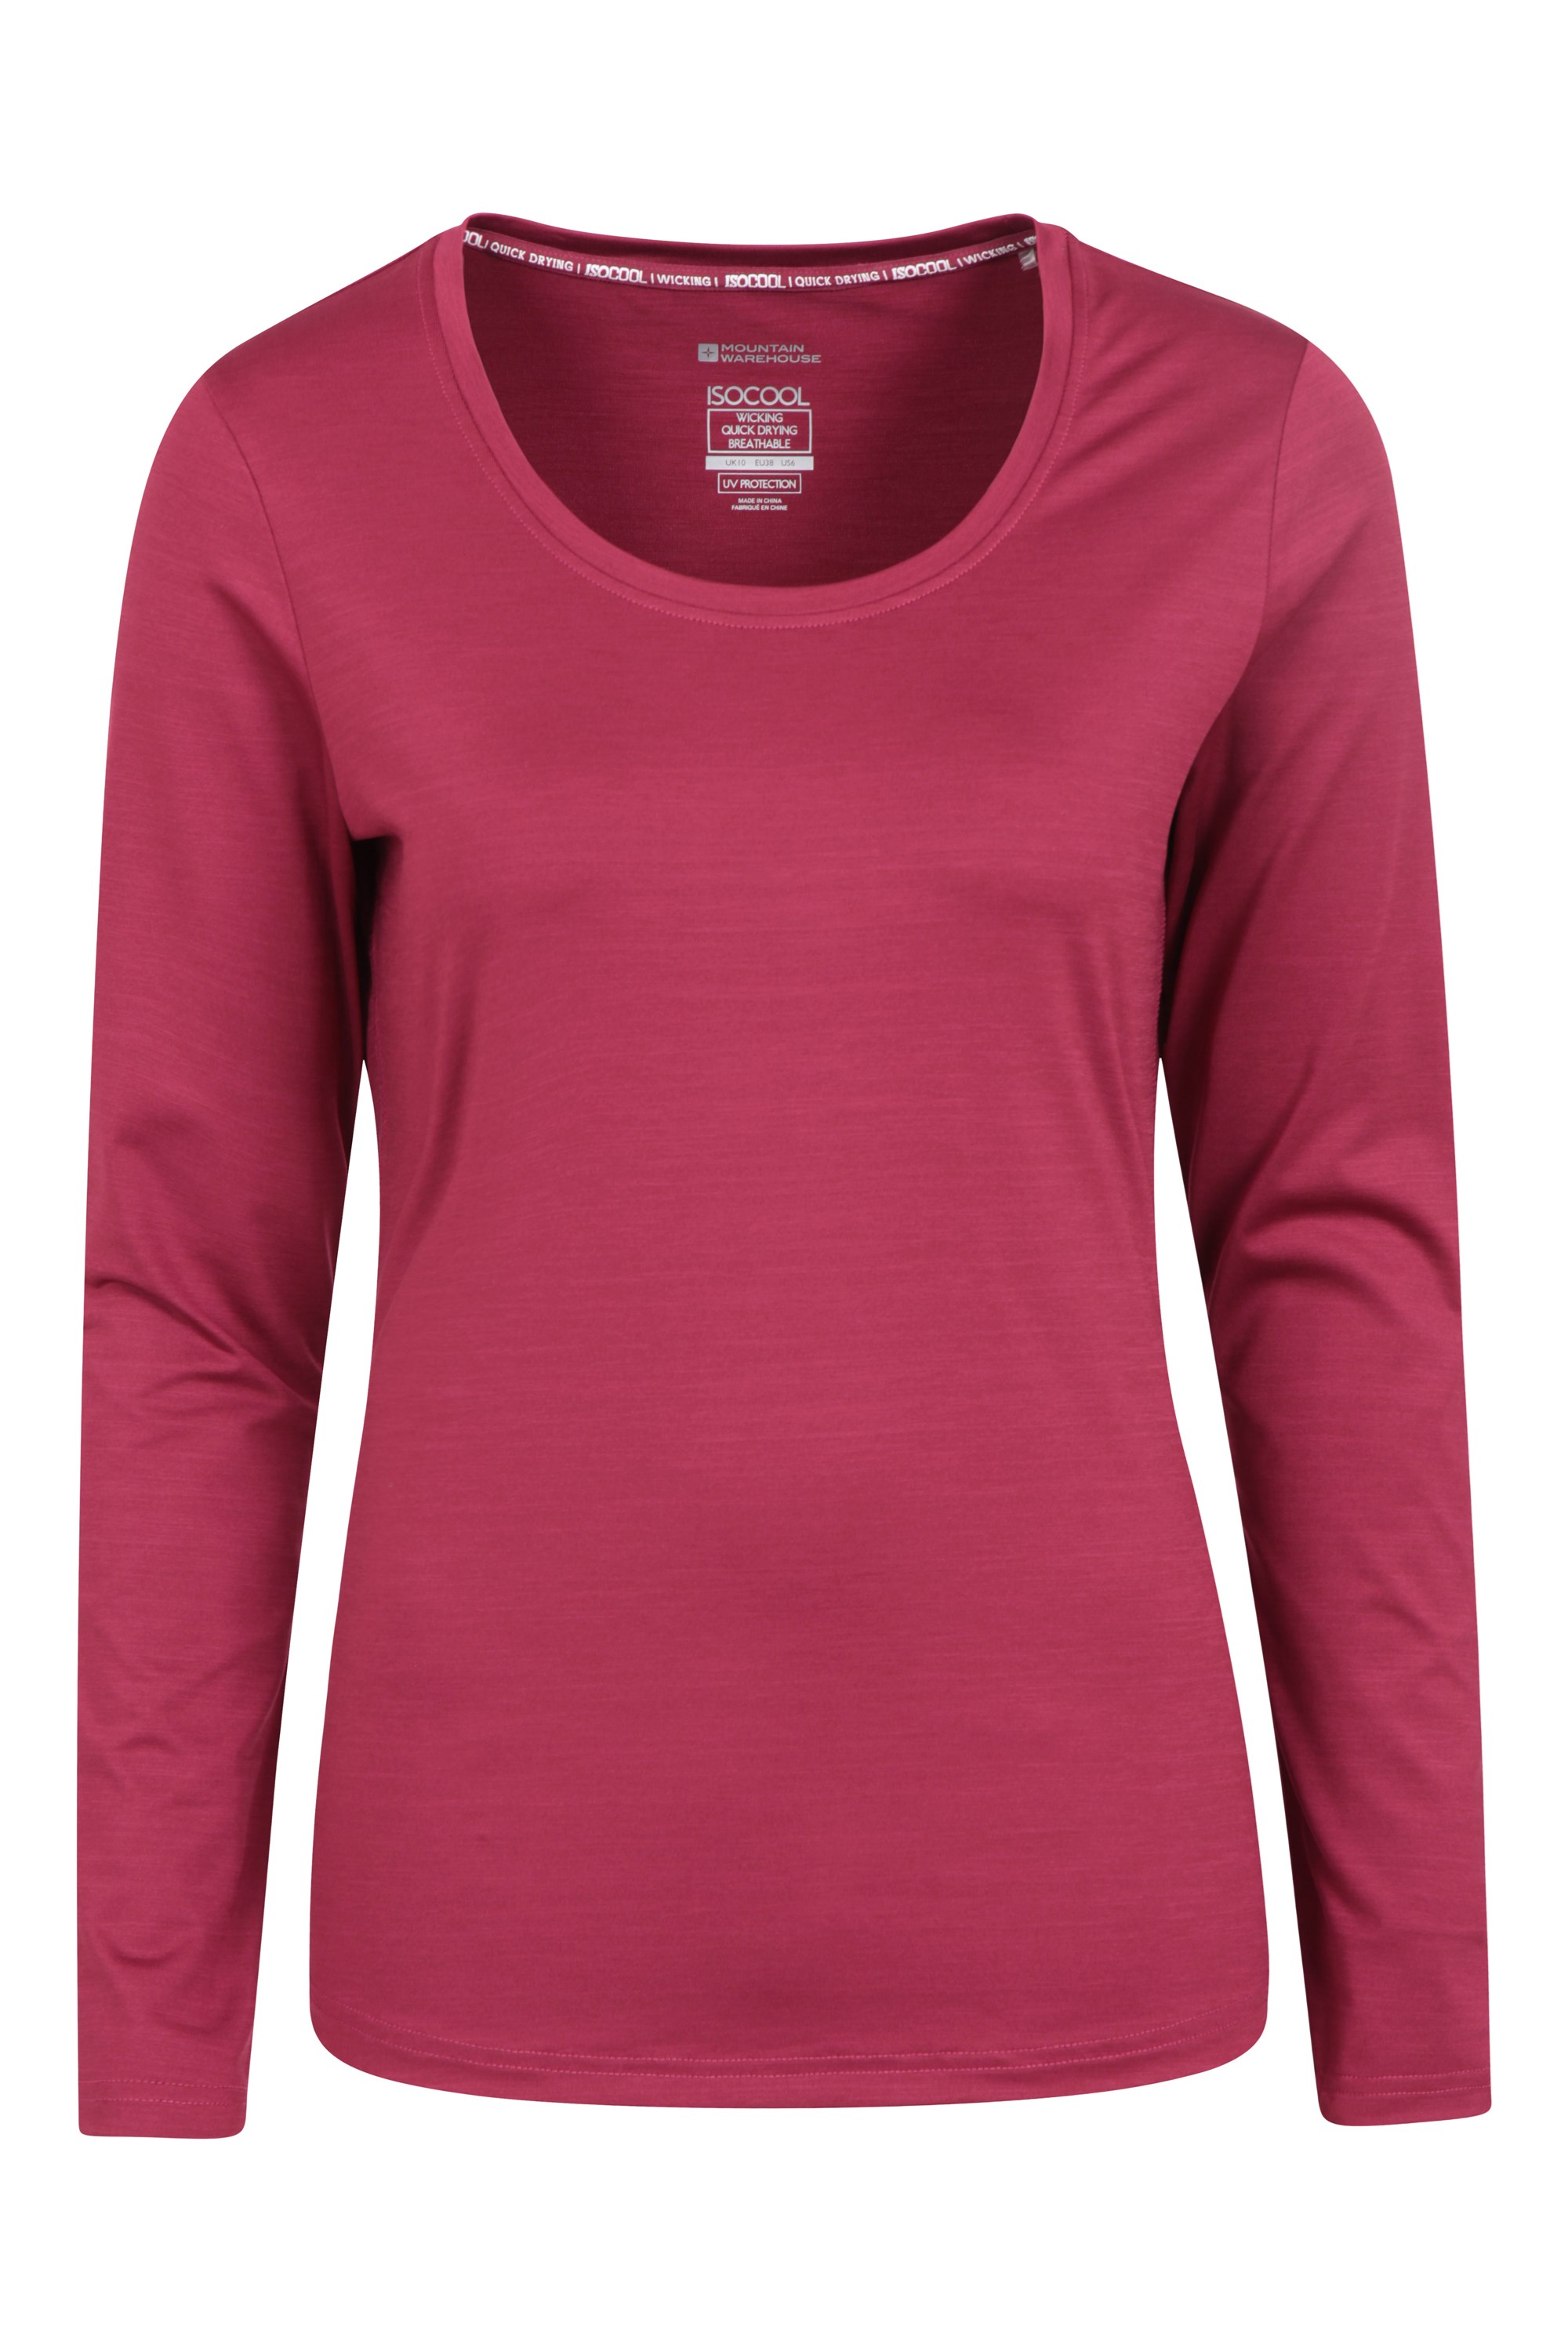 Panna Womens Long Sleeved Top - Red